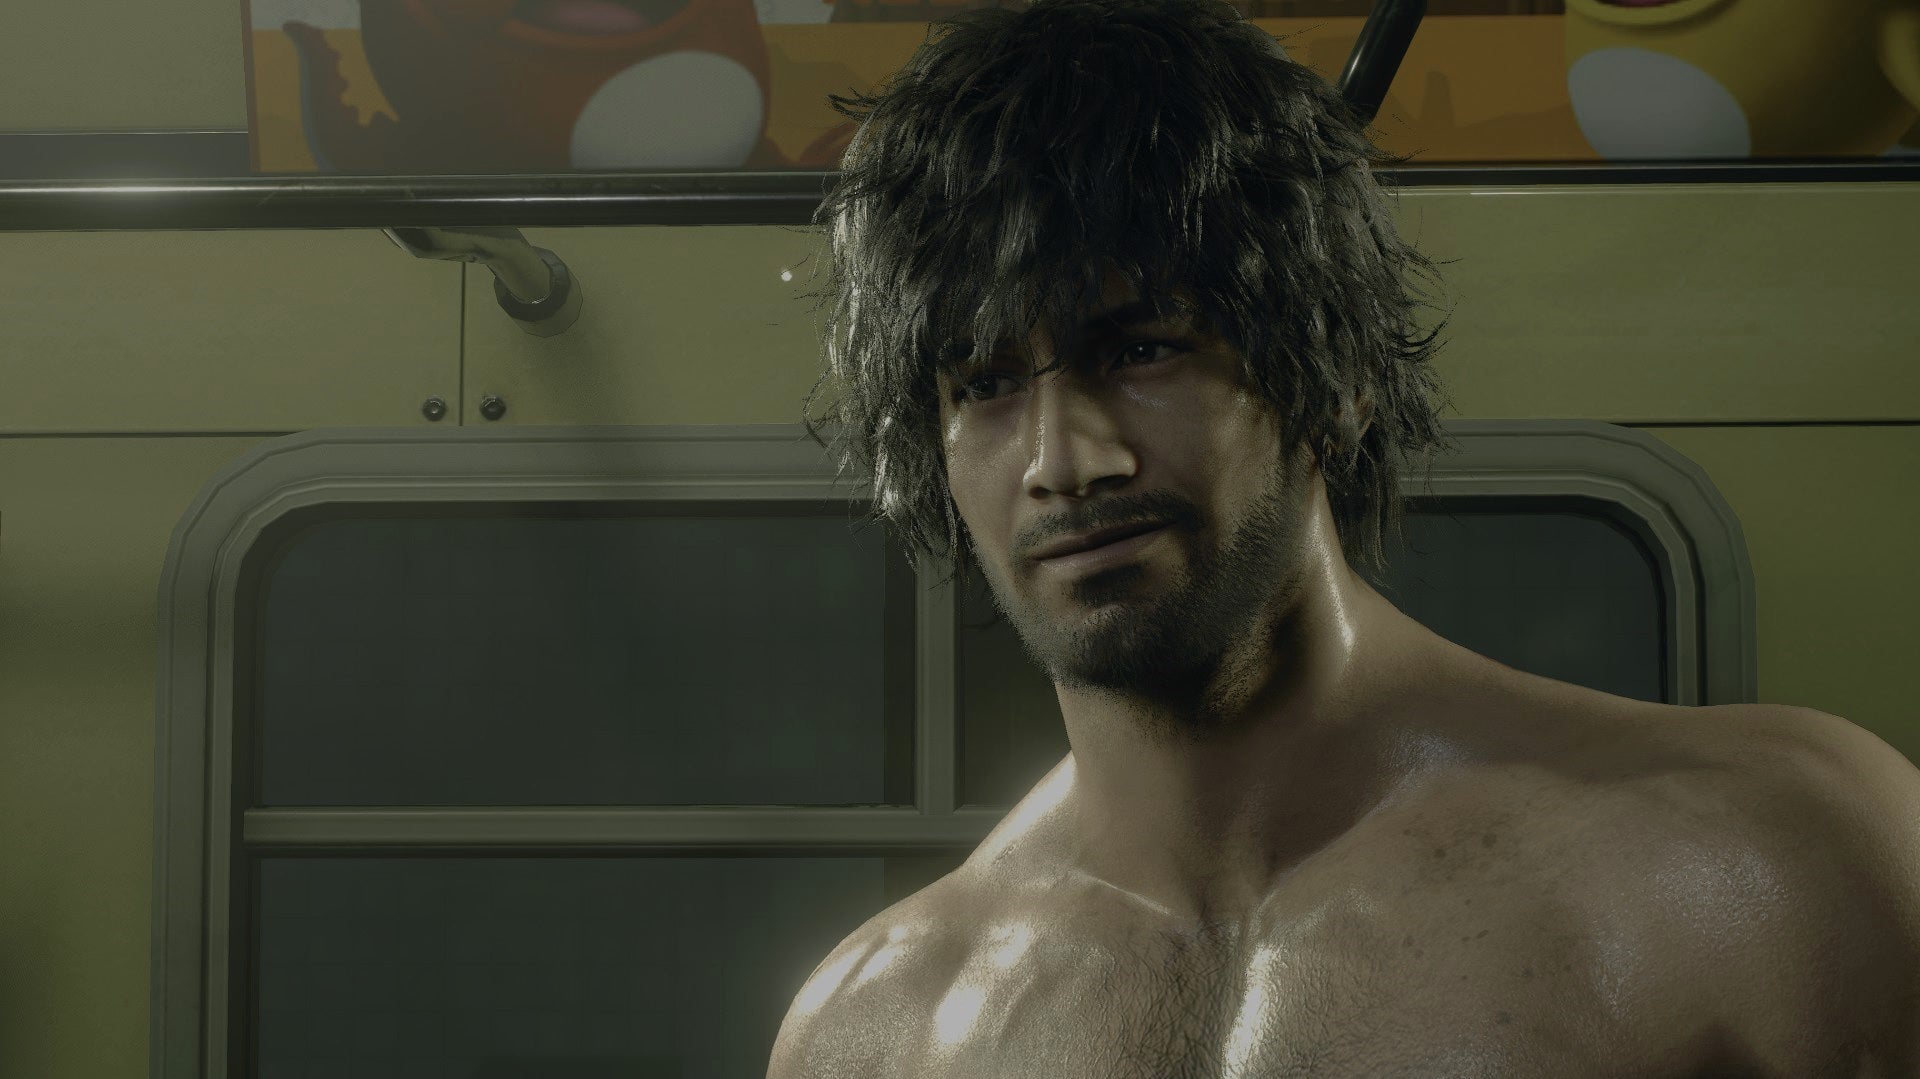 Here's a shirtless Carlos mod for Resident Evil 3—you're welcome.